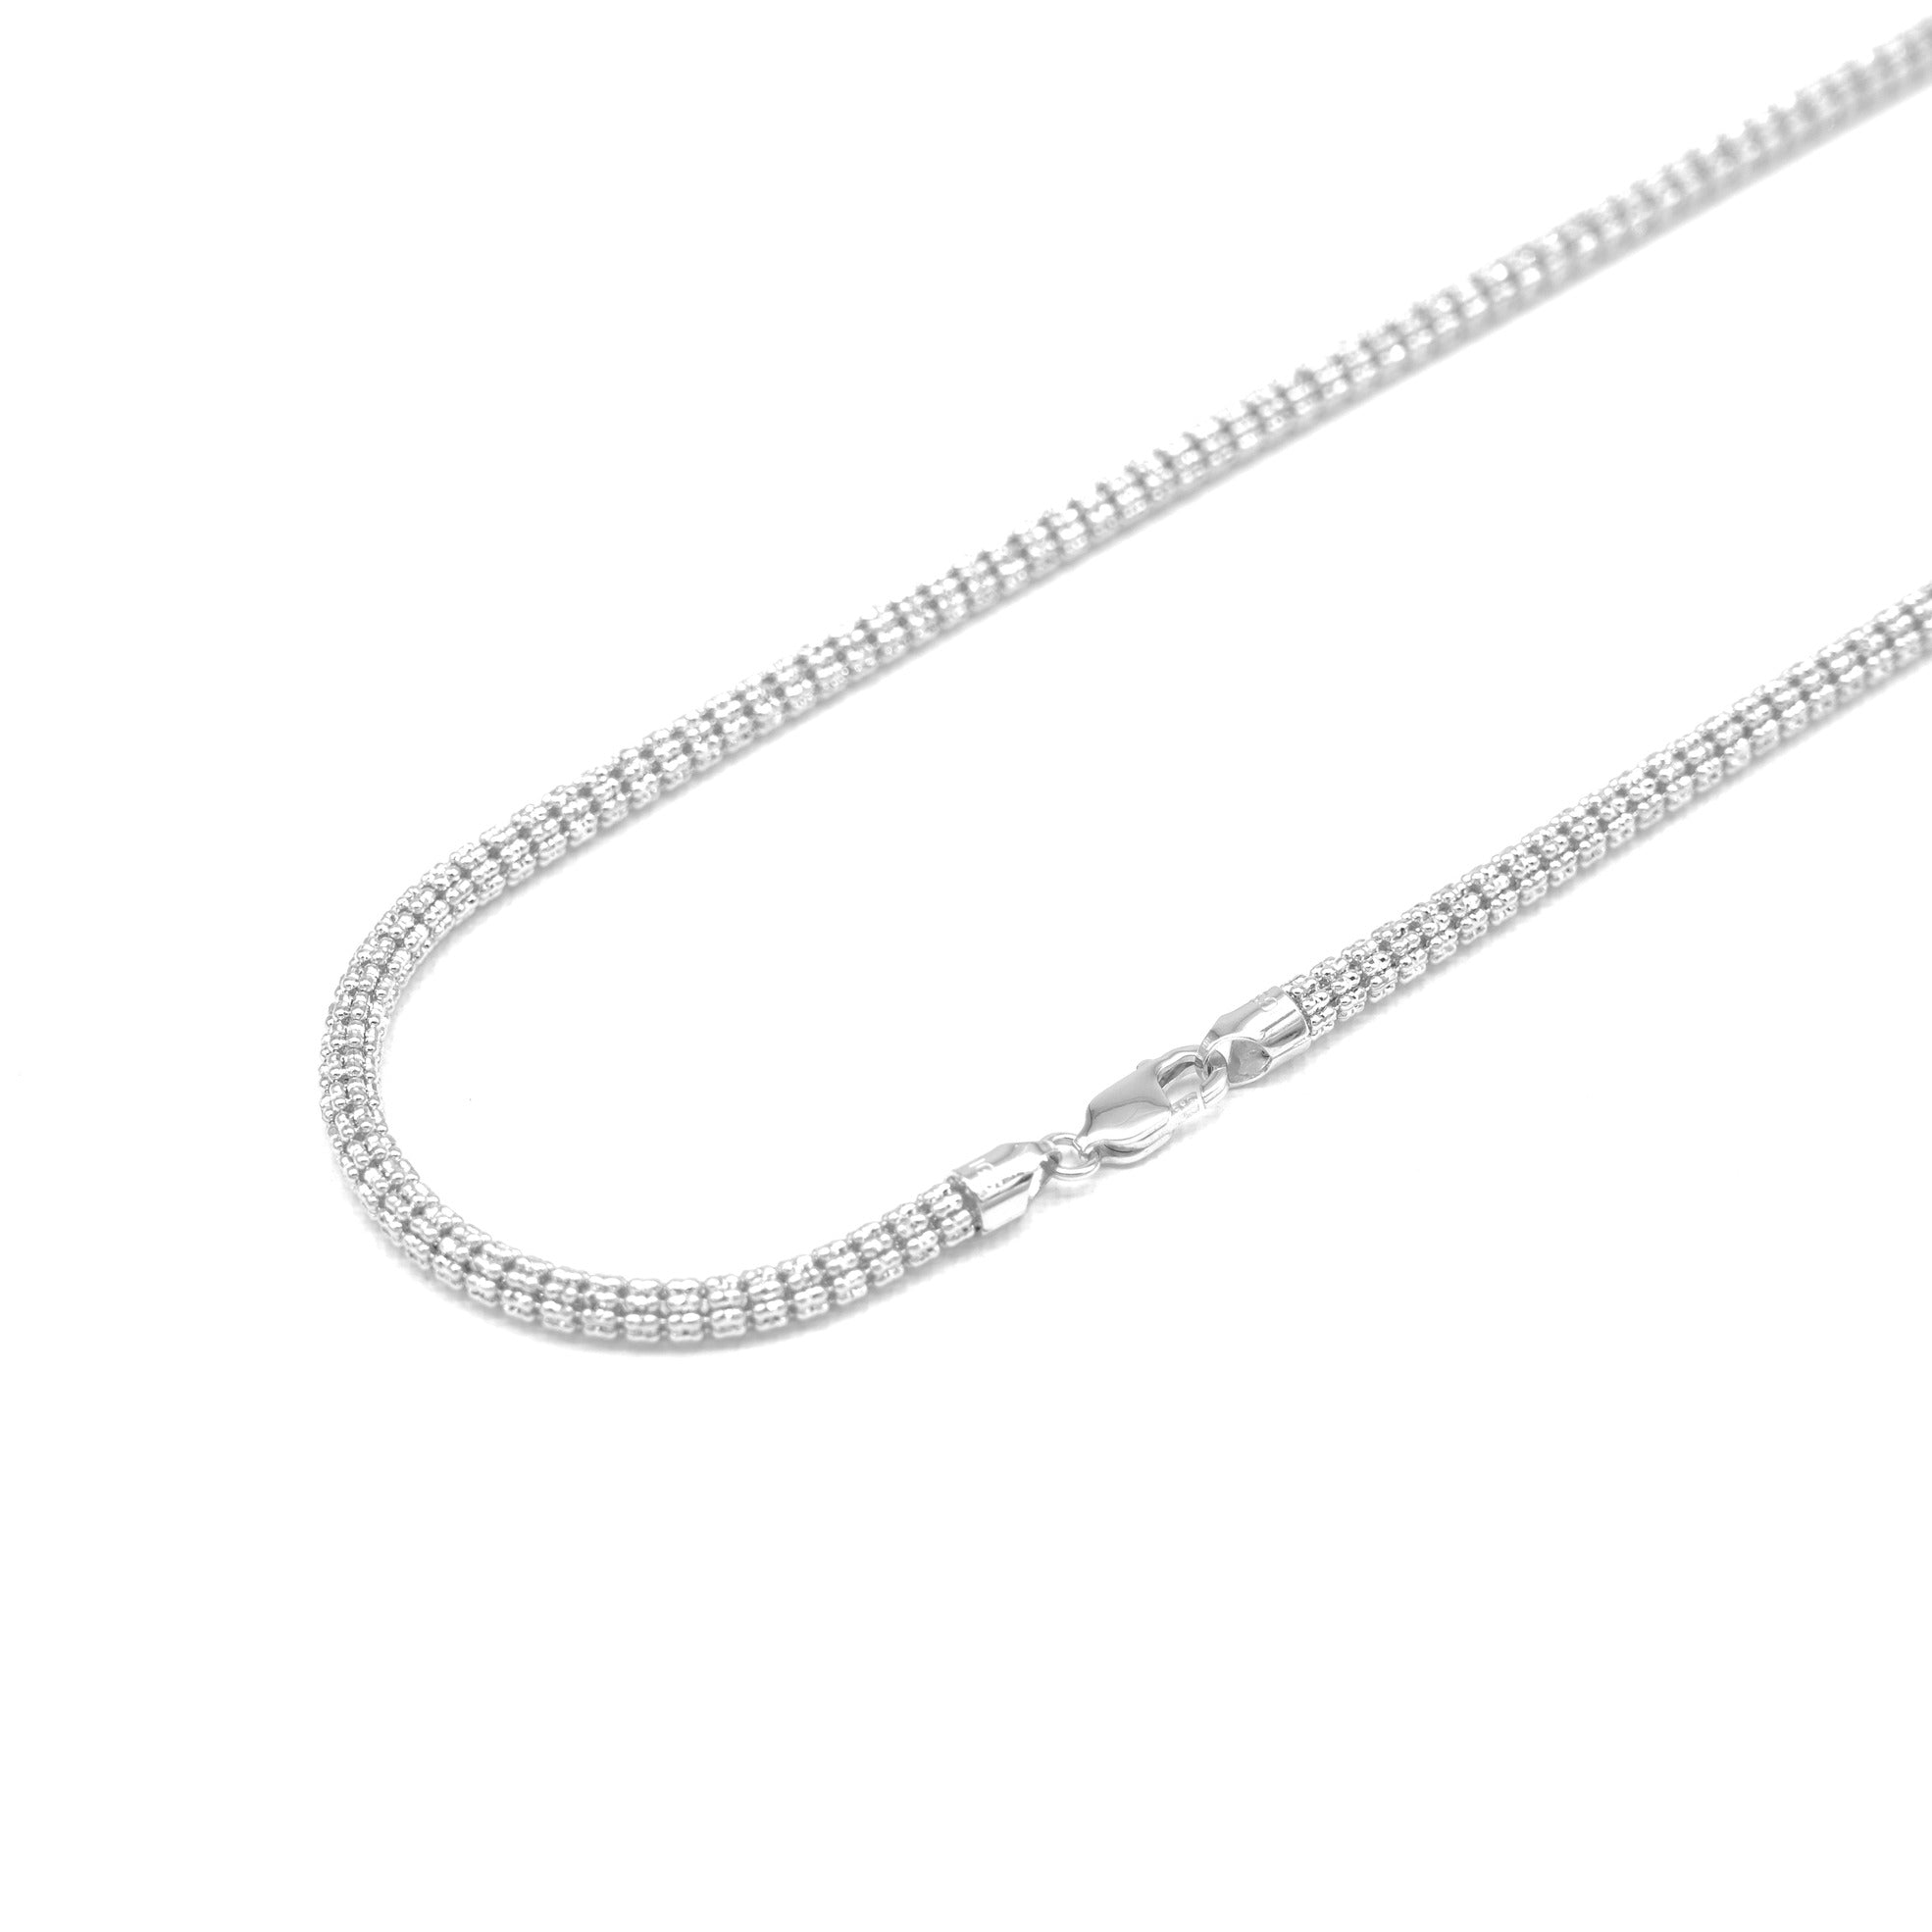 4.5mm 10kt Ice Gold Chain